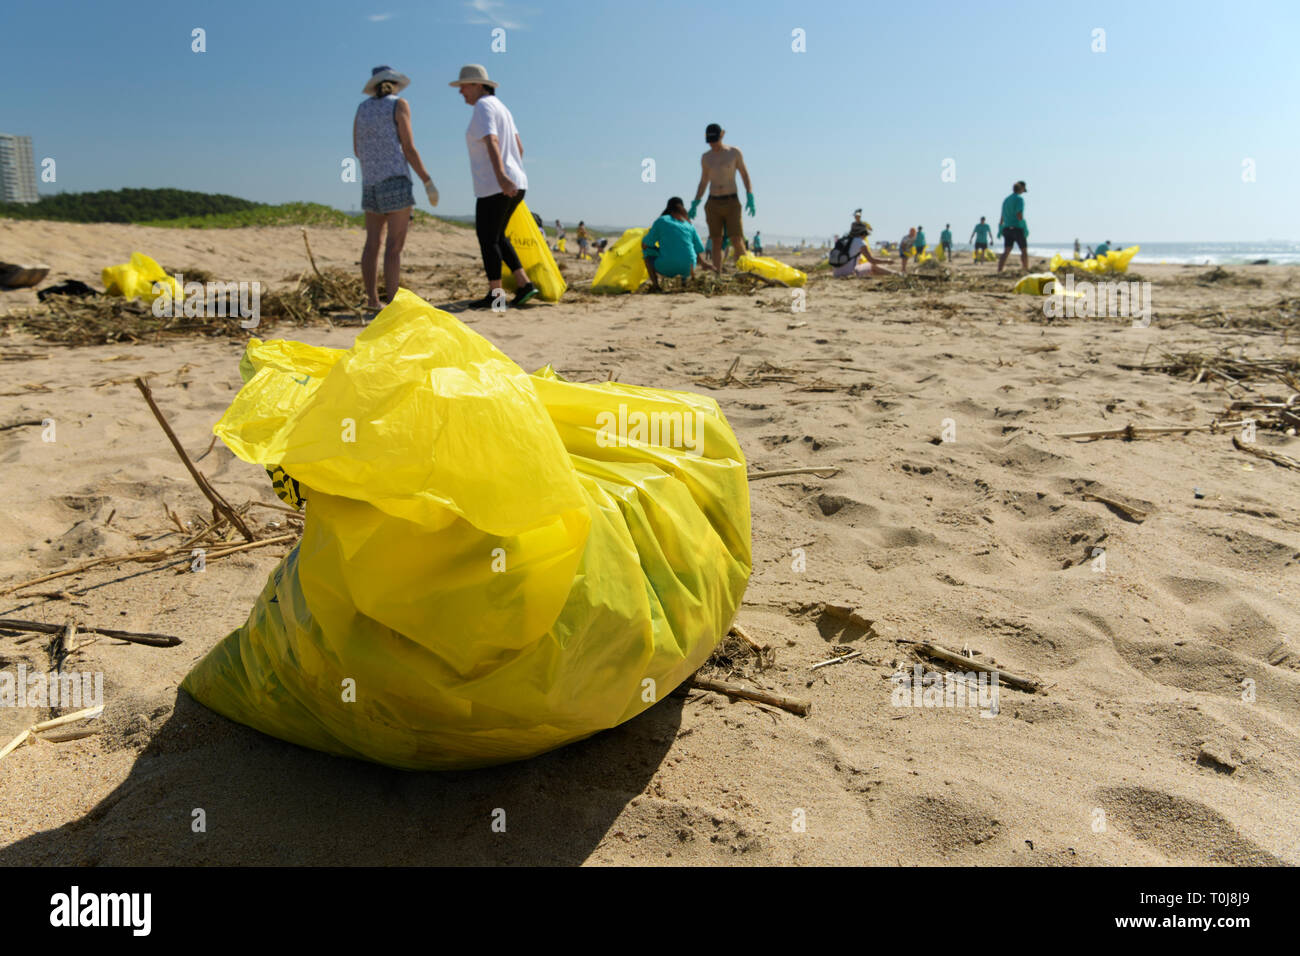 Durban, KwaZulu-Natal, South Africa, plastic pollution, citizens working as community volunteers to clean up human waste from beach, people, landscape Stock Photo